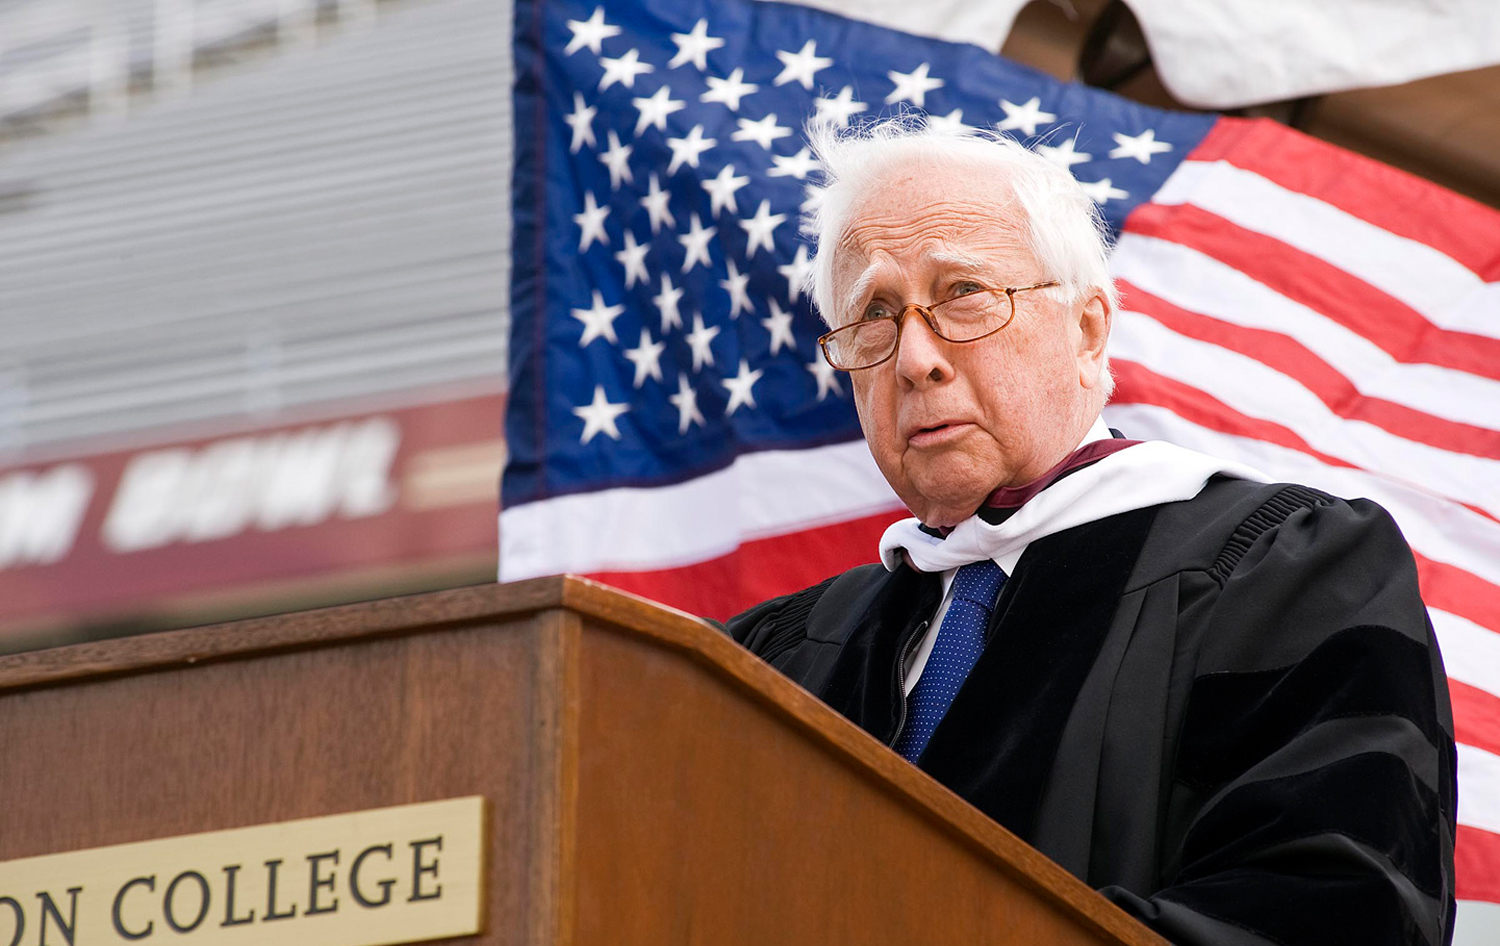 David Mccullough speaking at a podium with an American flag behind him  